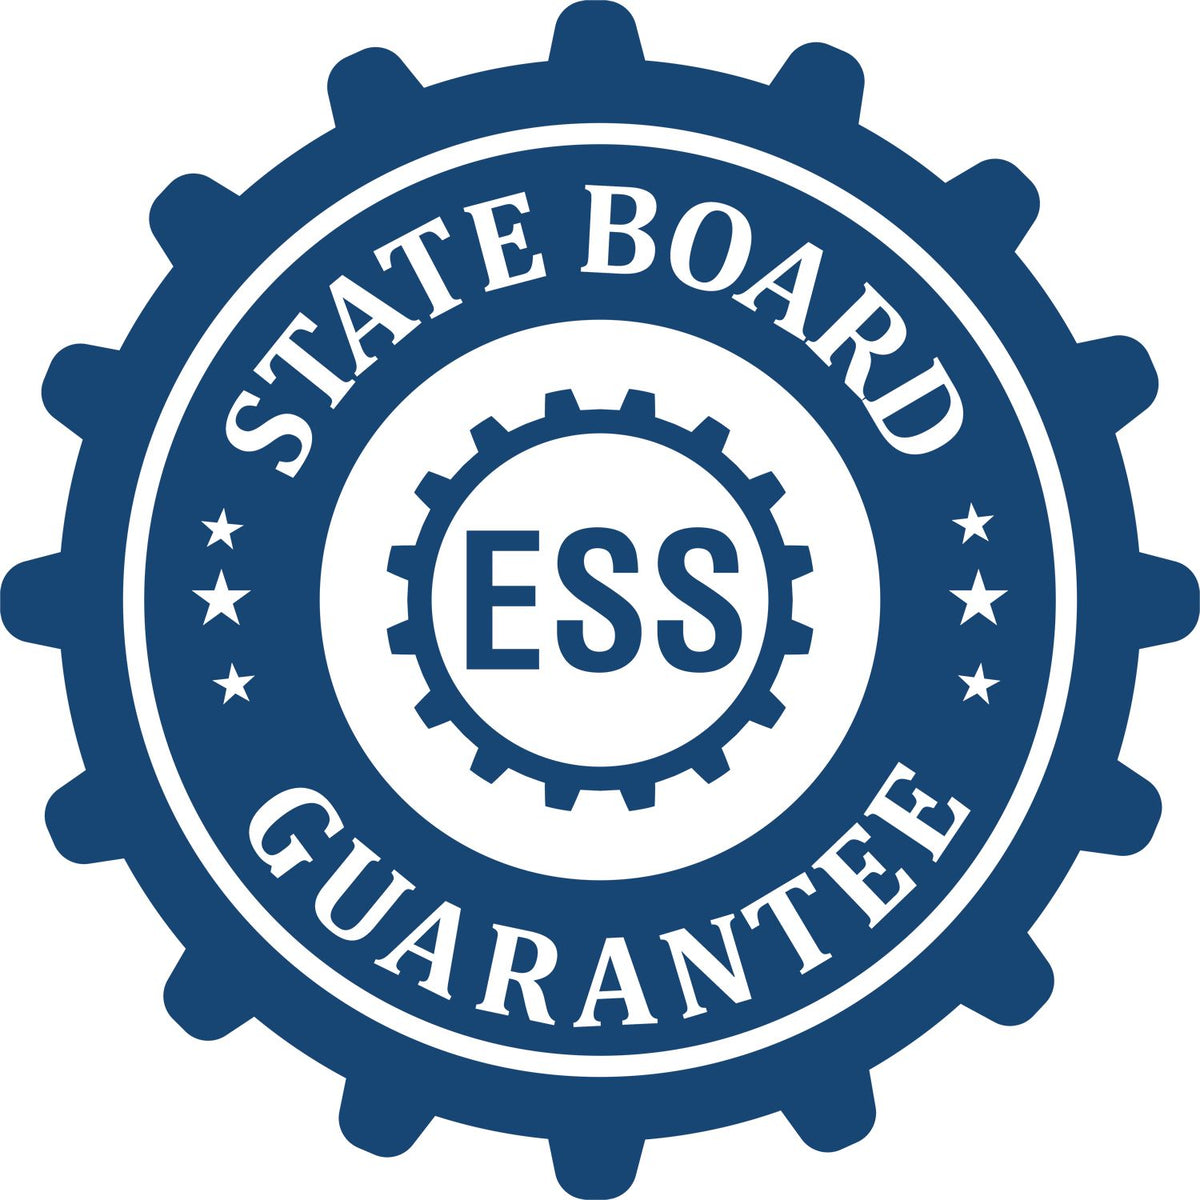 An emblem in a gear shape illustrating a state board guarantee for the Hybrid Iowa Geologist Seal